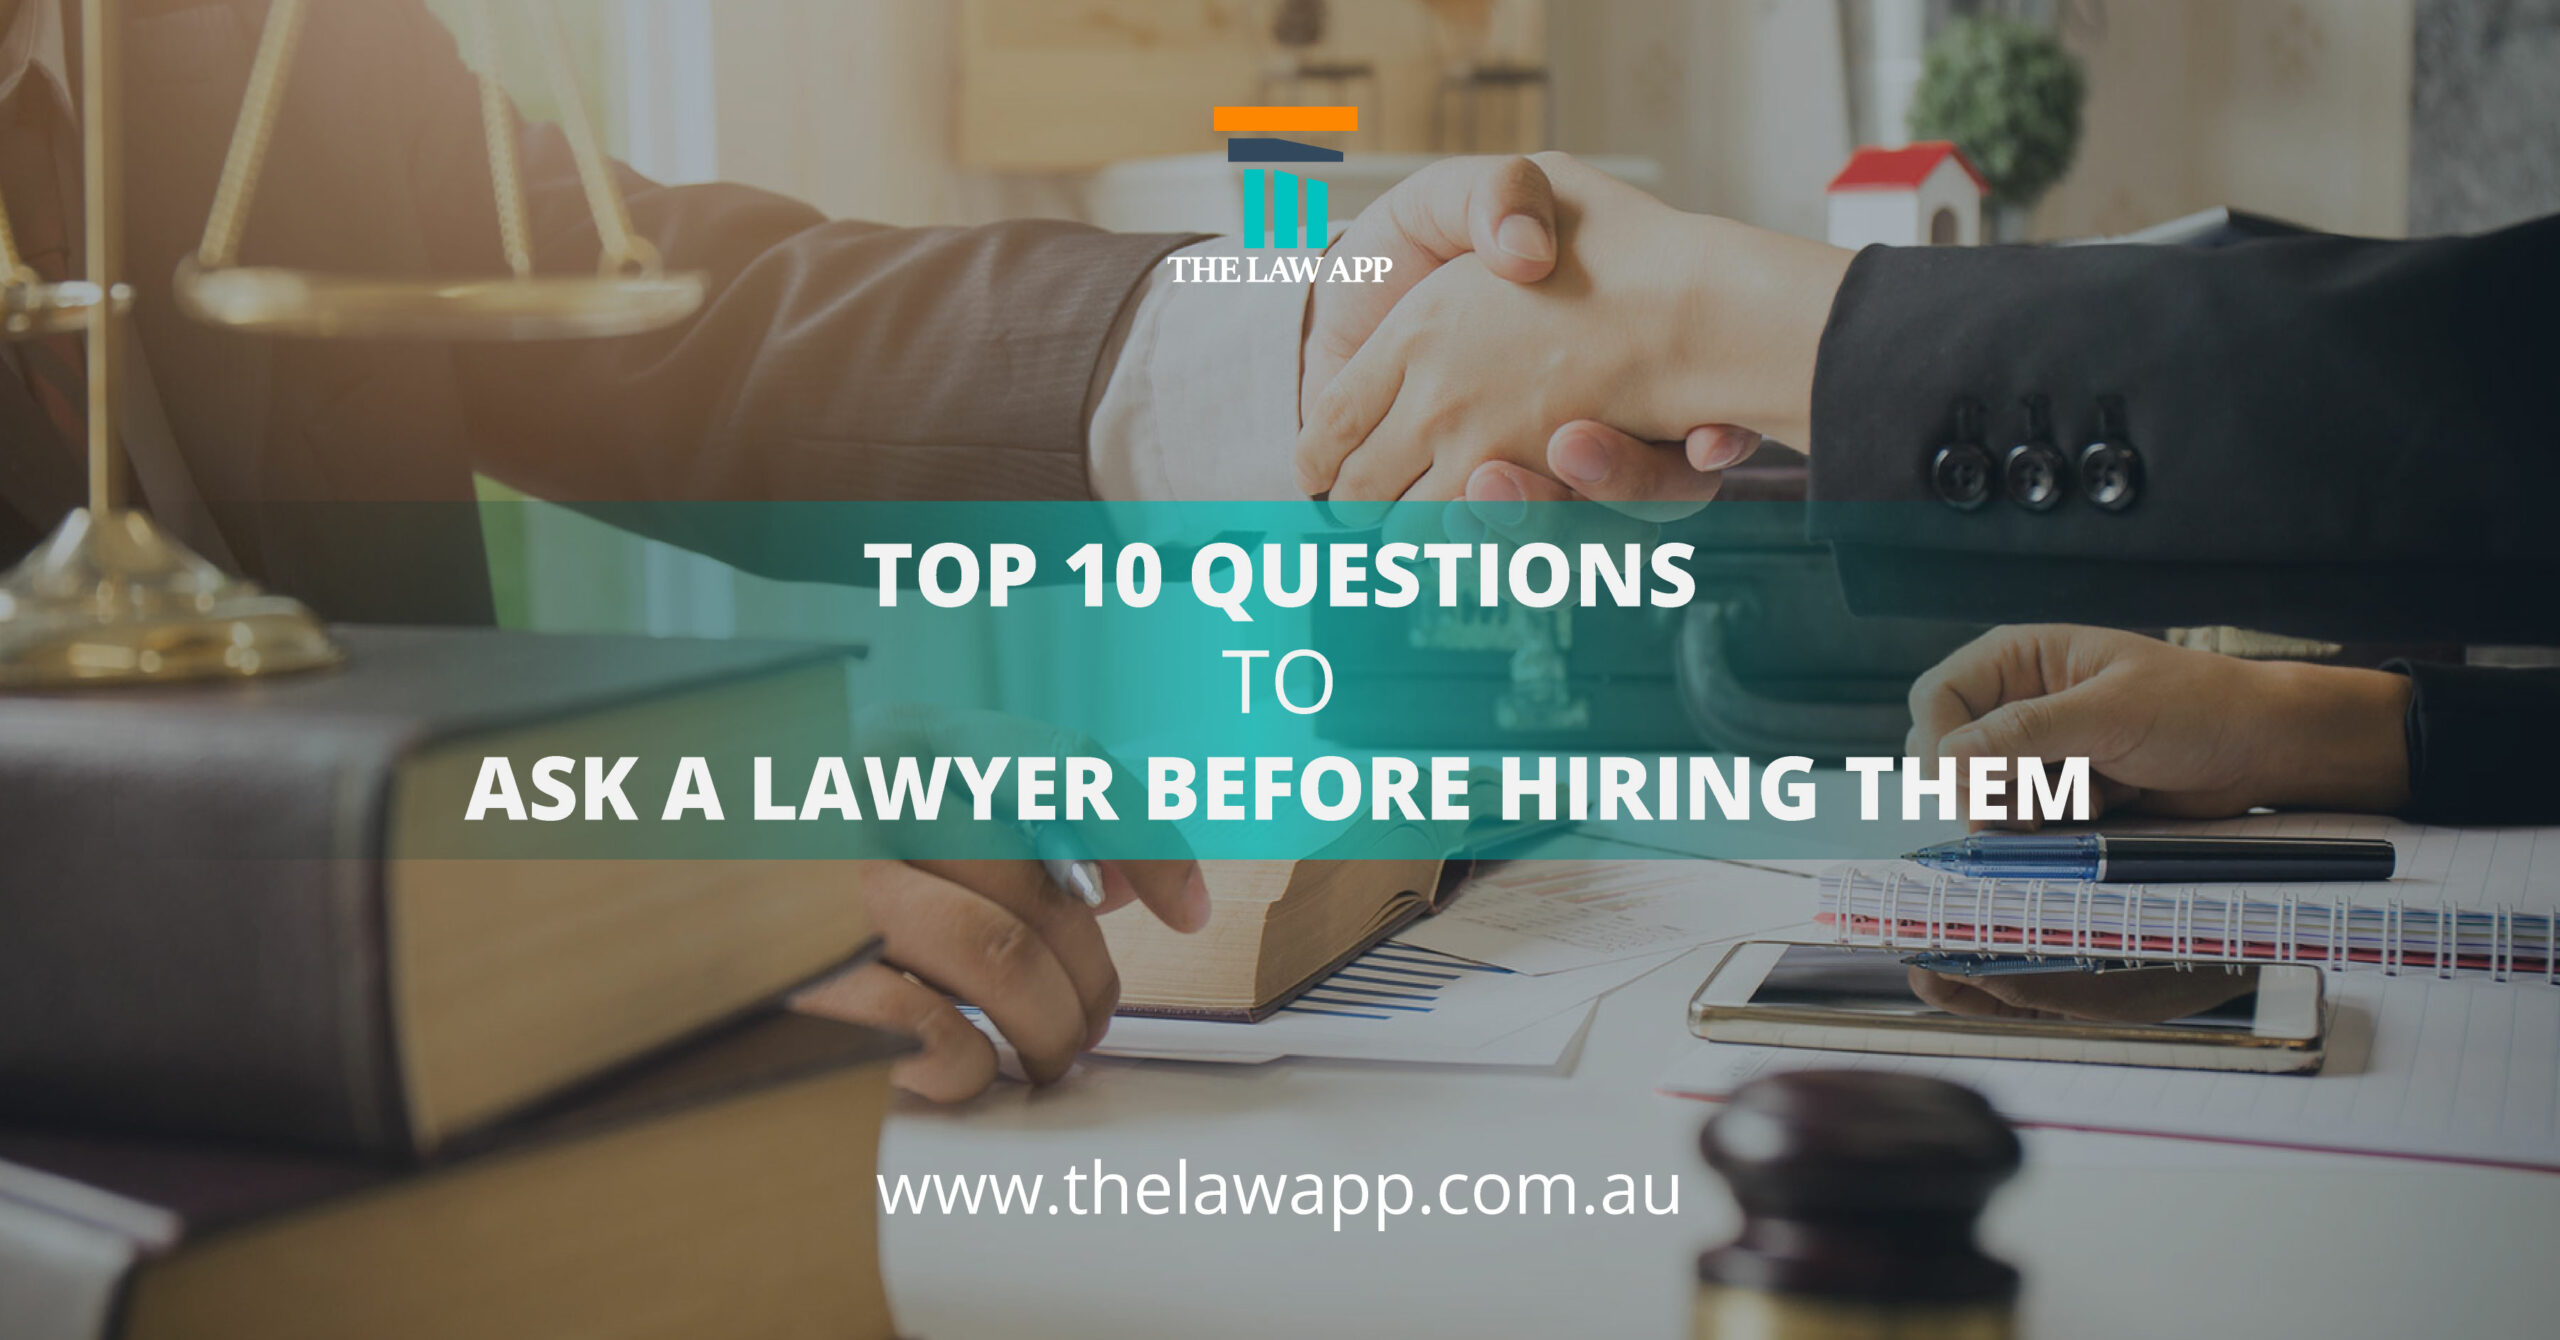 Top 10 Questions to Ask a Lawyer Before Hiring Them